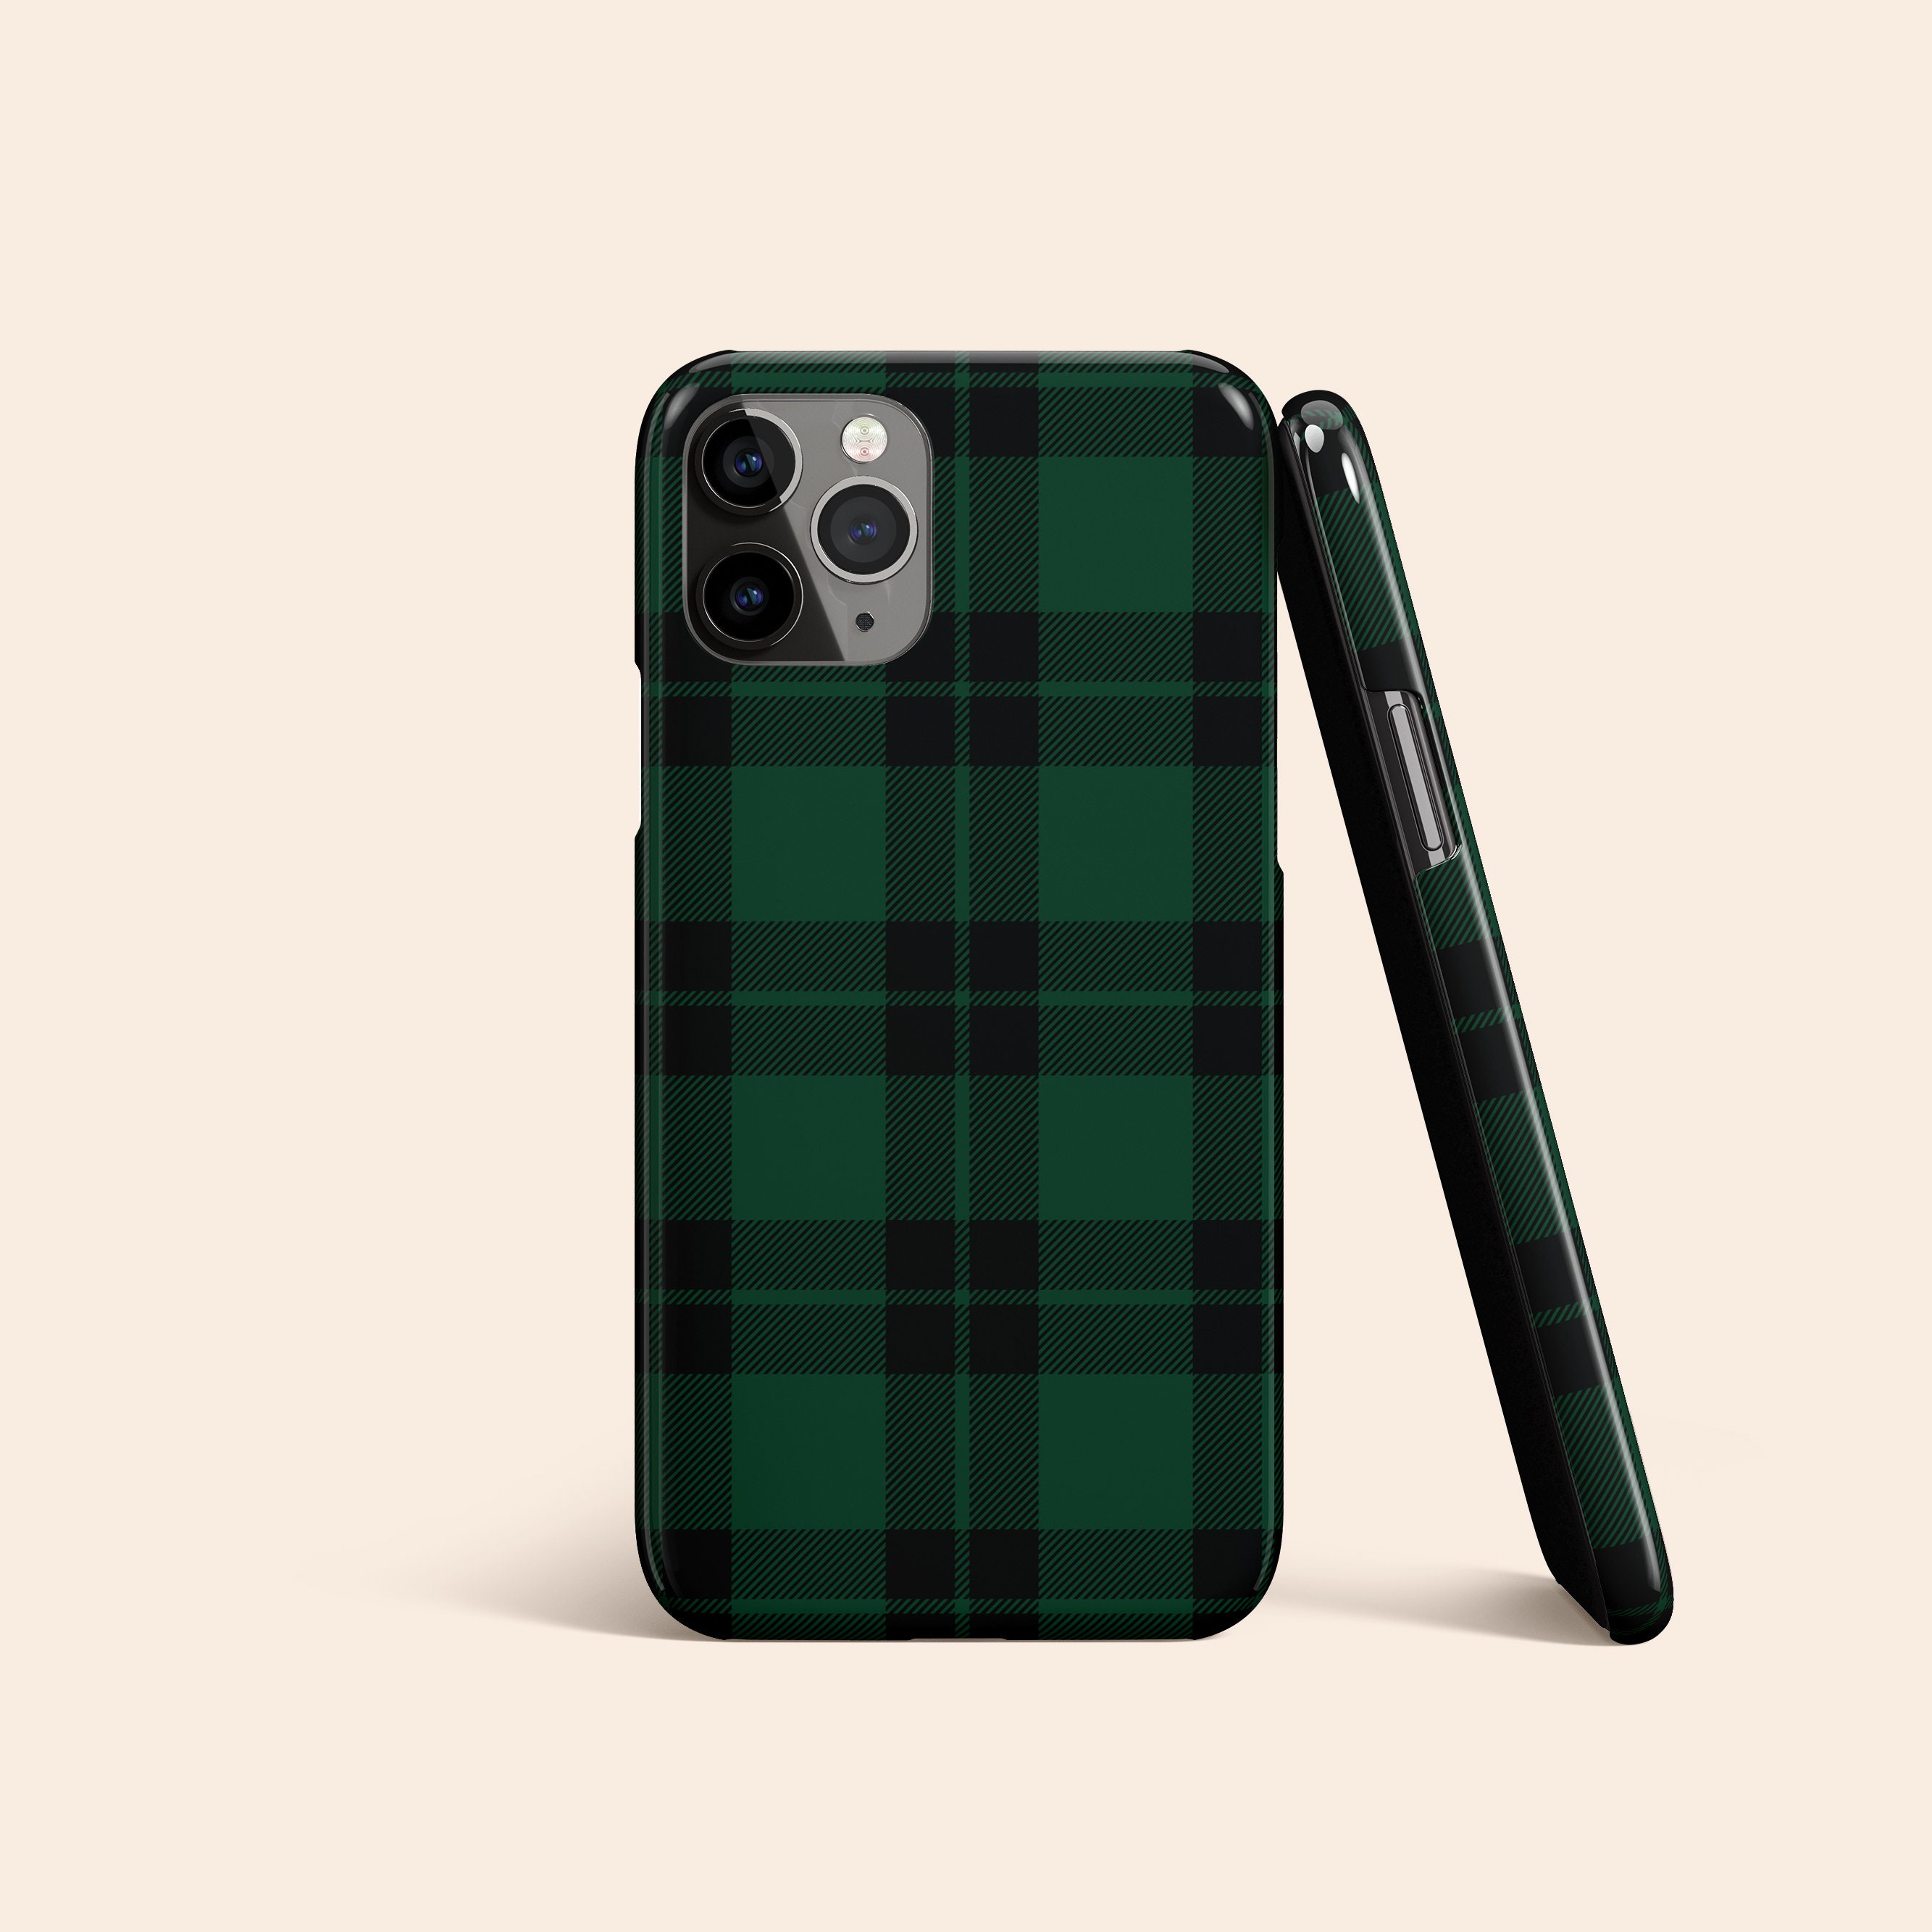 Harvest-Plaid-Fall-Colors-Autumn-Vintage-Check-Retro-Orange-Blue-Tartan-63  phone case for Samsung Galaxy A51 4G for Women Men Gifts,Soft silicone  Style Shockproof - Harvest-Plaid-Fall-Colors-Autumn-Vi 